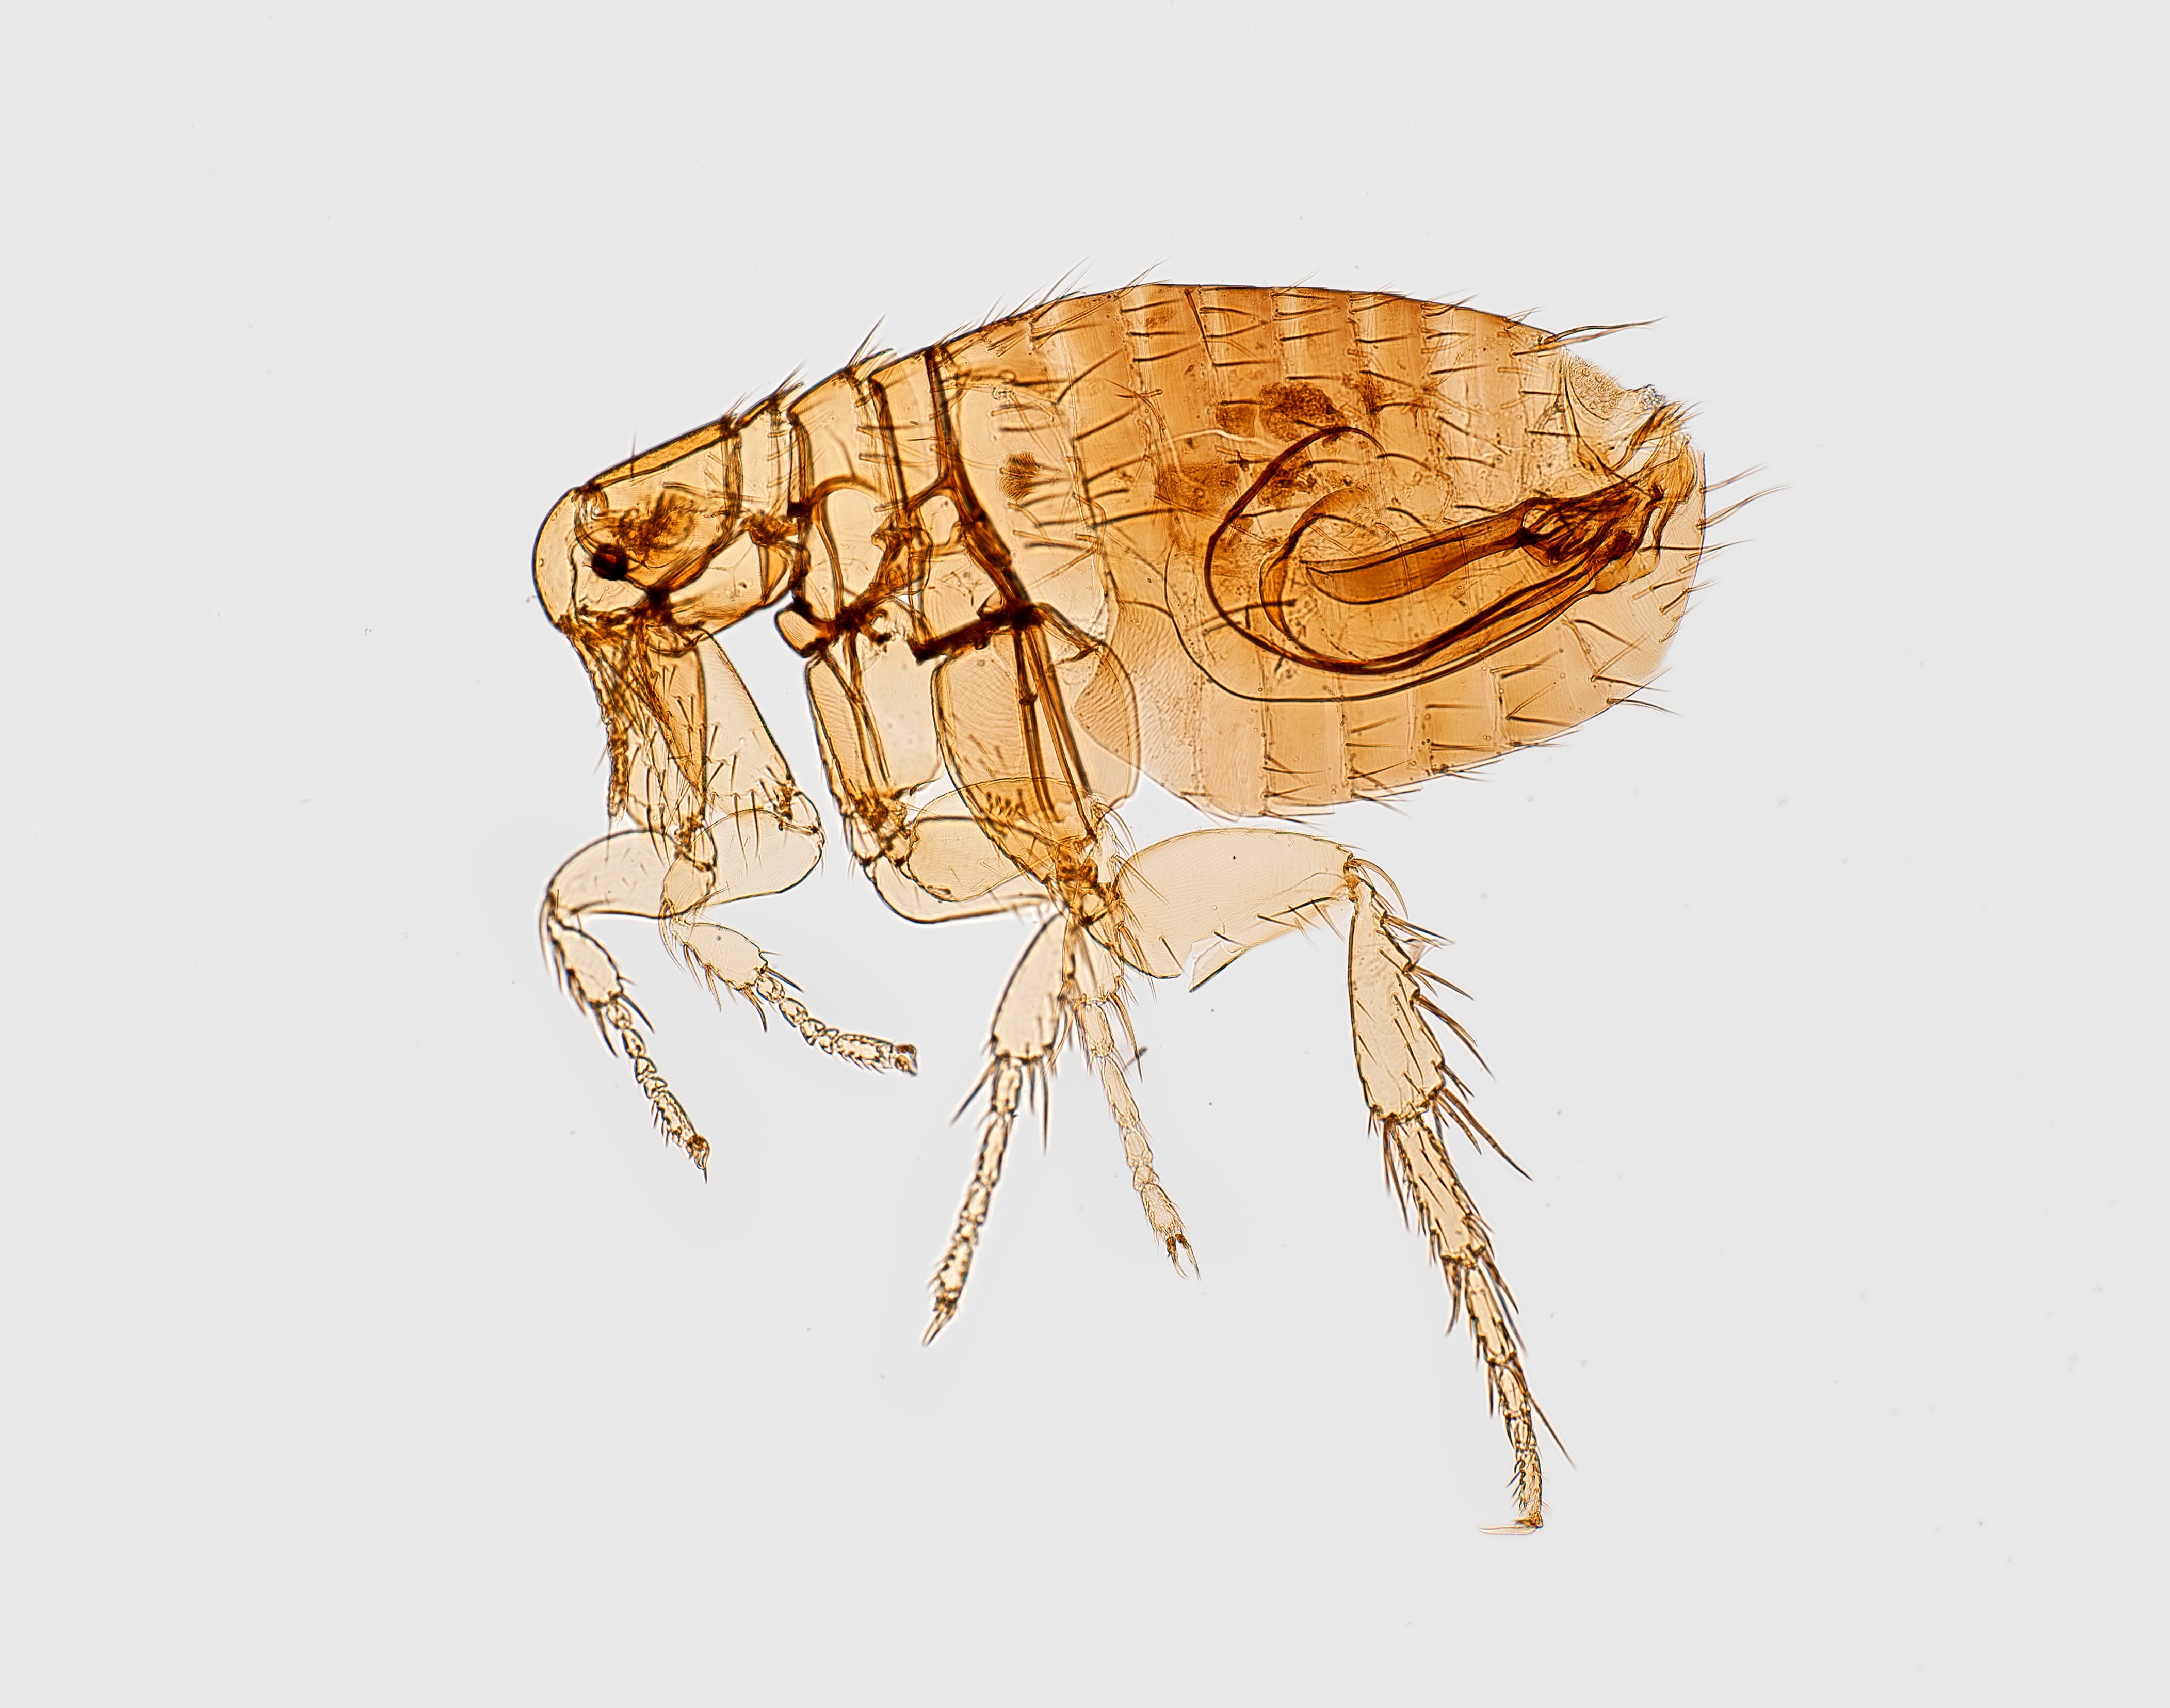 How To Control Fleas In The Home